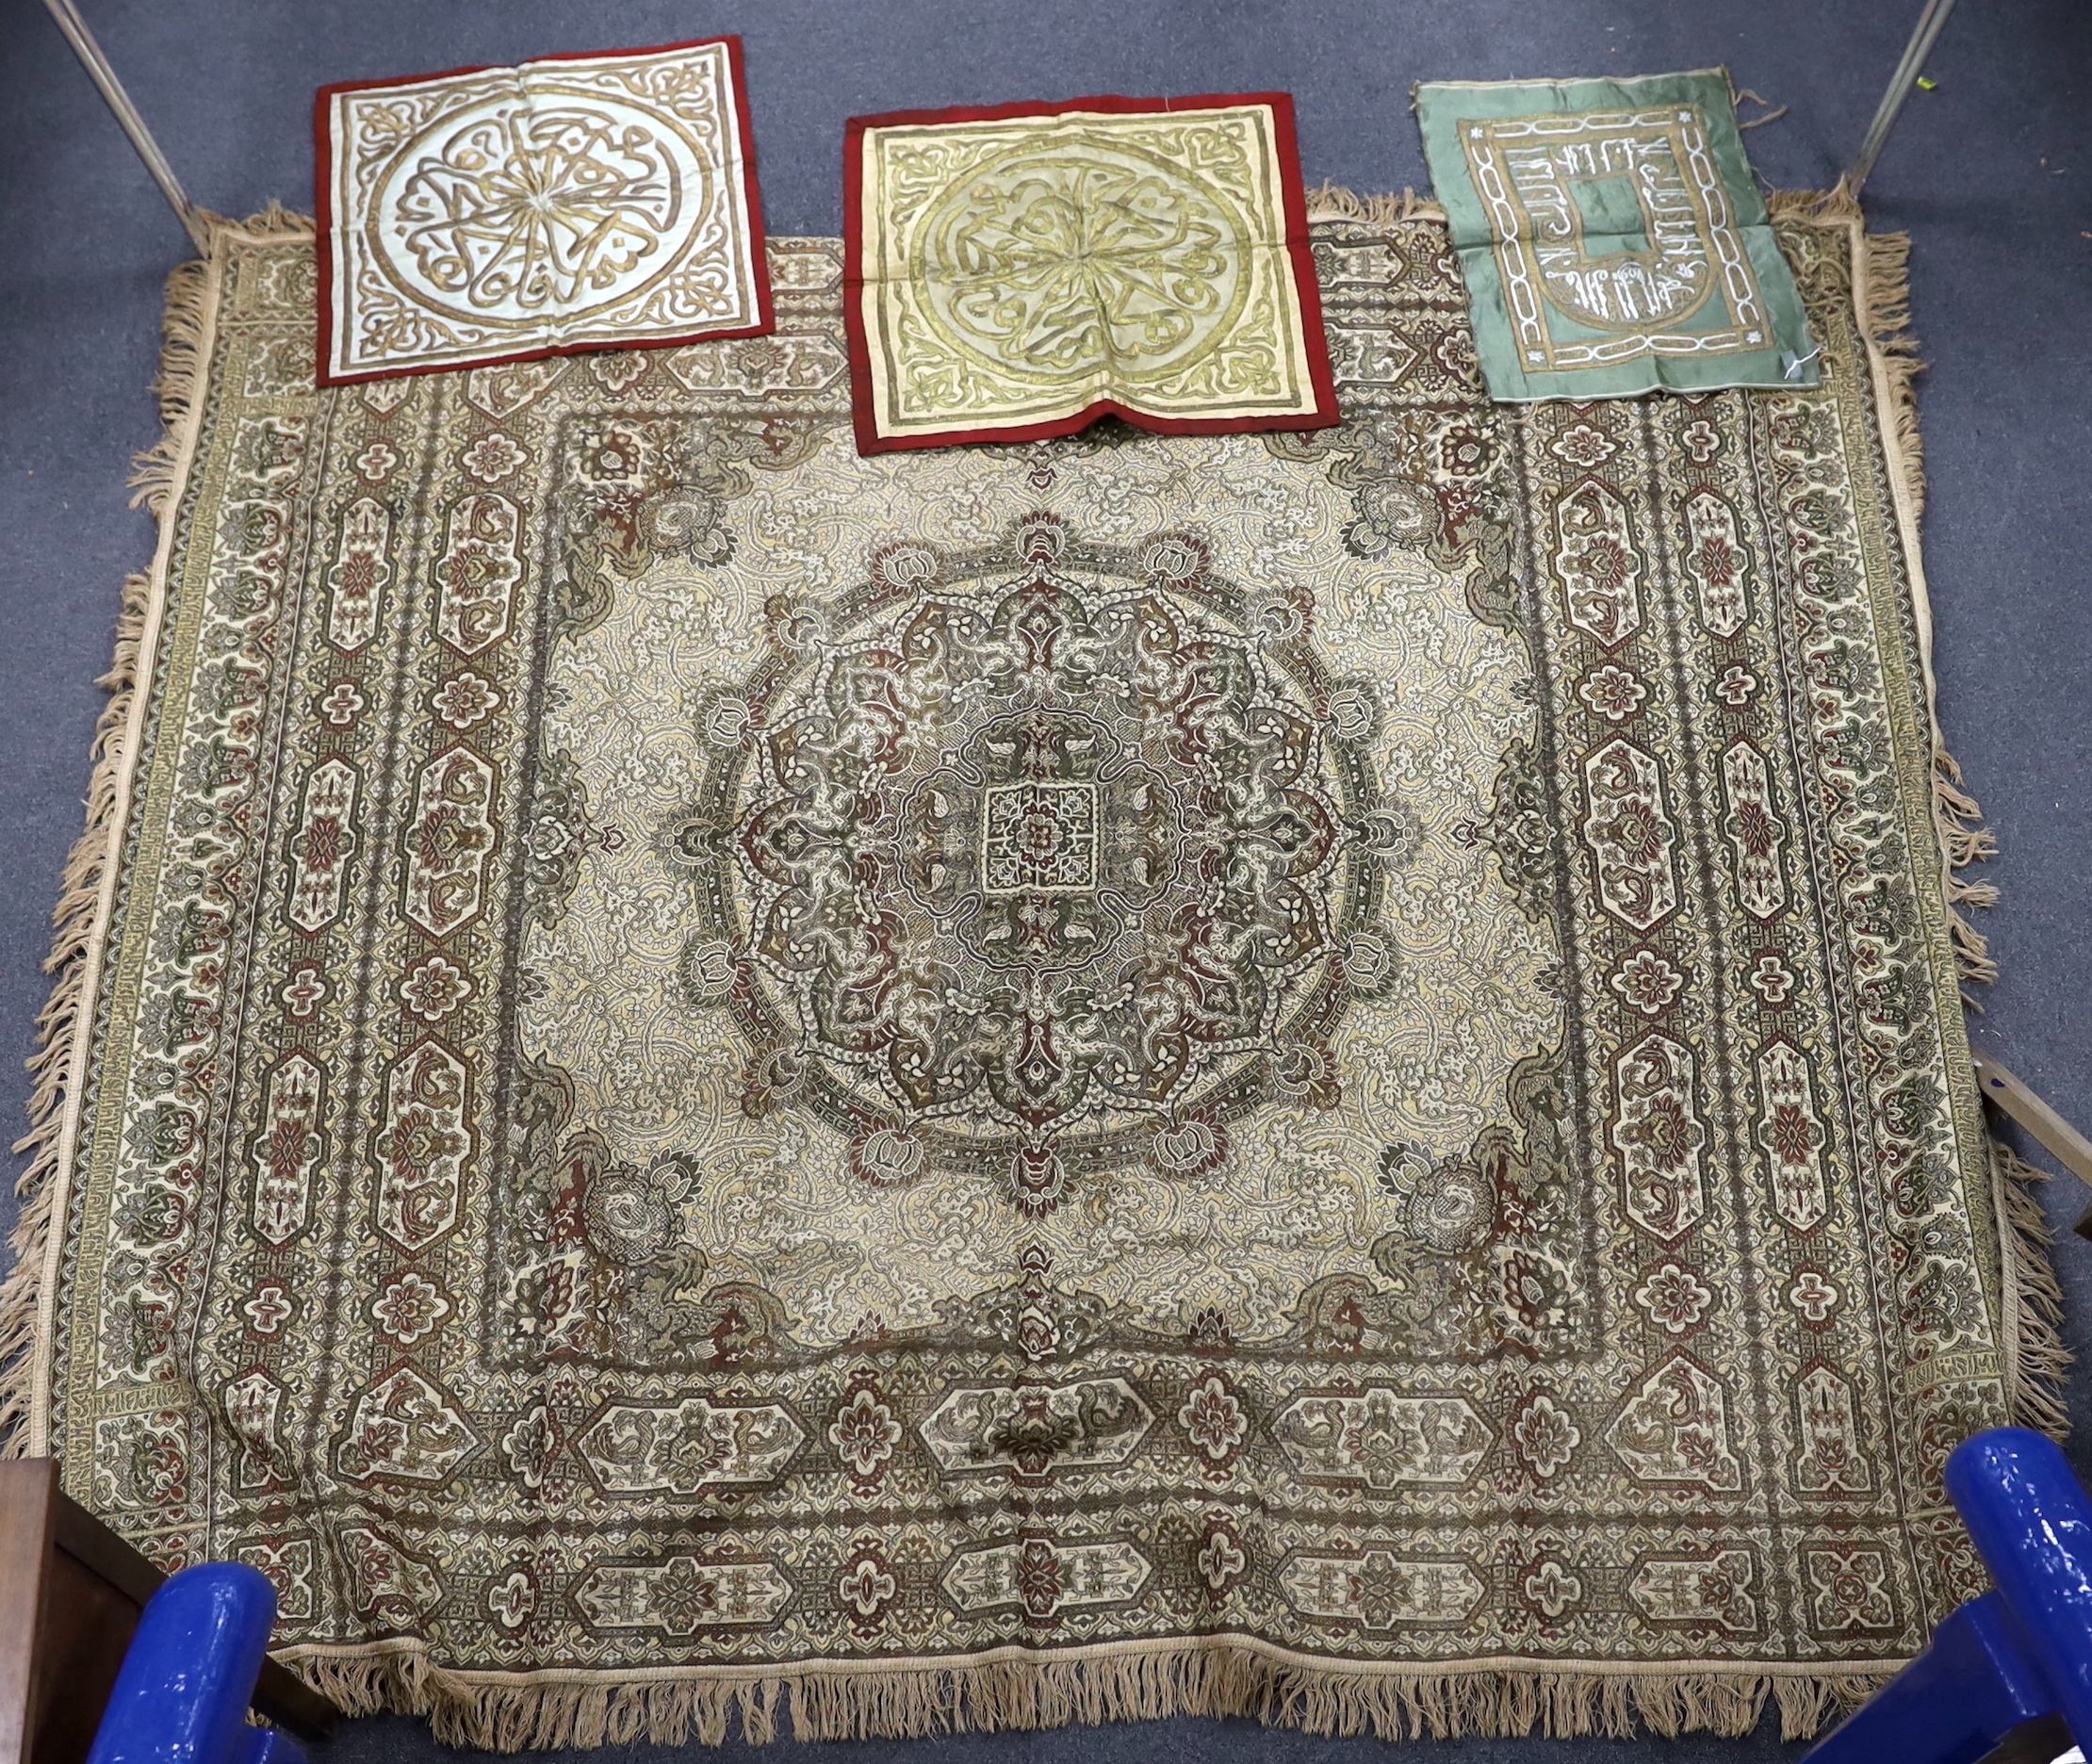 Two 19th century Indian heavy metallic thread embroideries on silk, another smaller similar panel and later 20th century machine woven fringed bedcover, two metal embroideries 53cm x 52cm